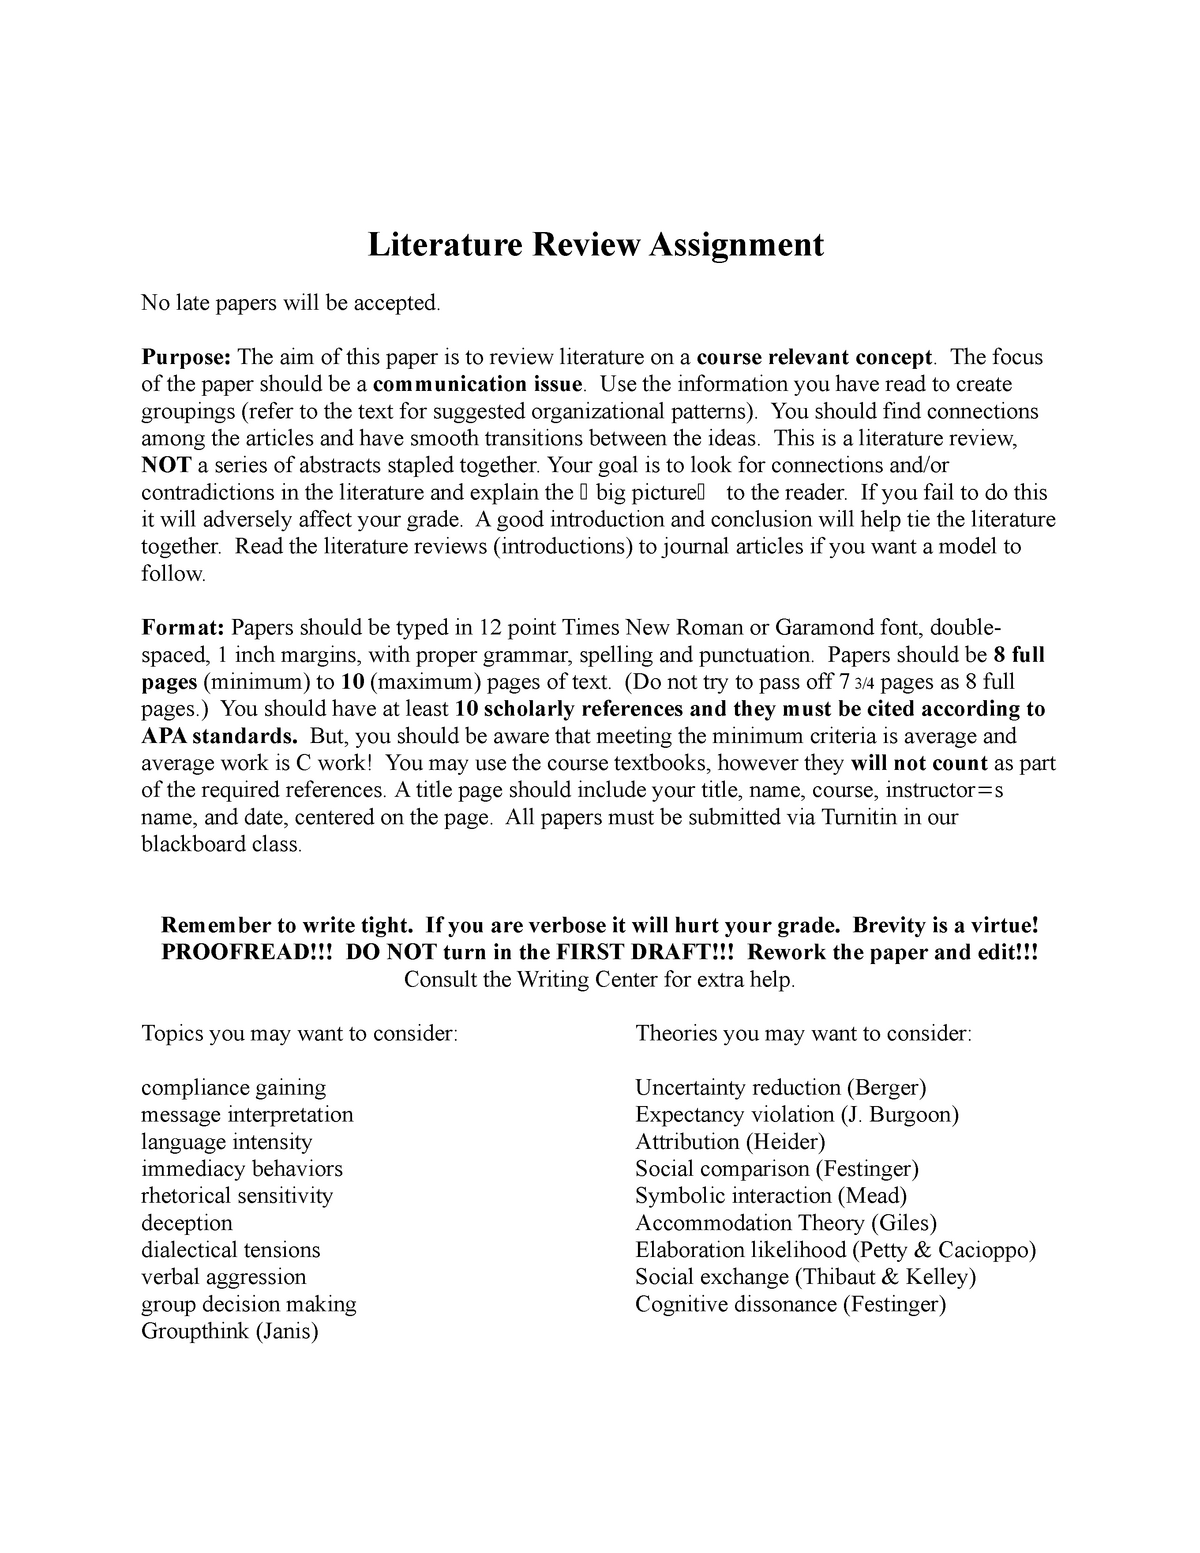 literature review assignment example